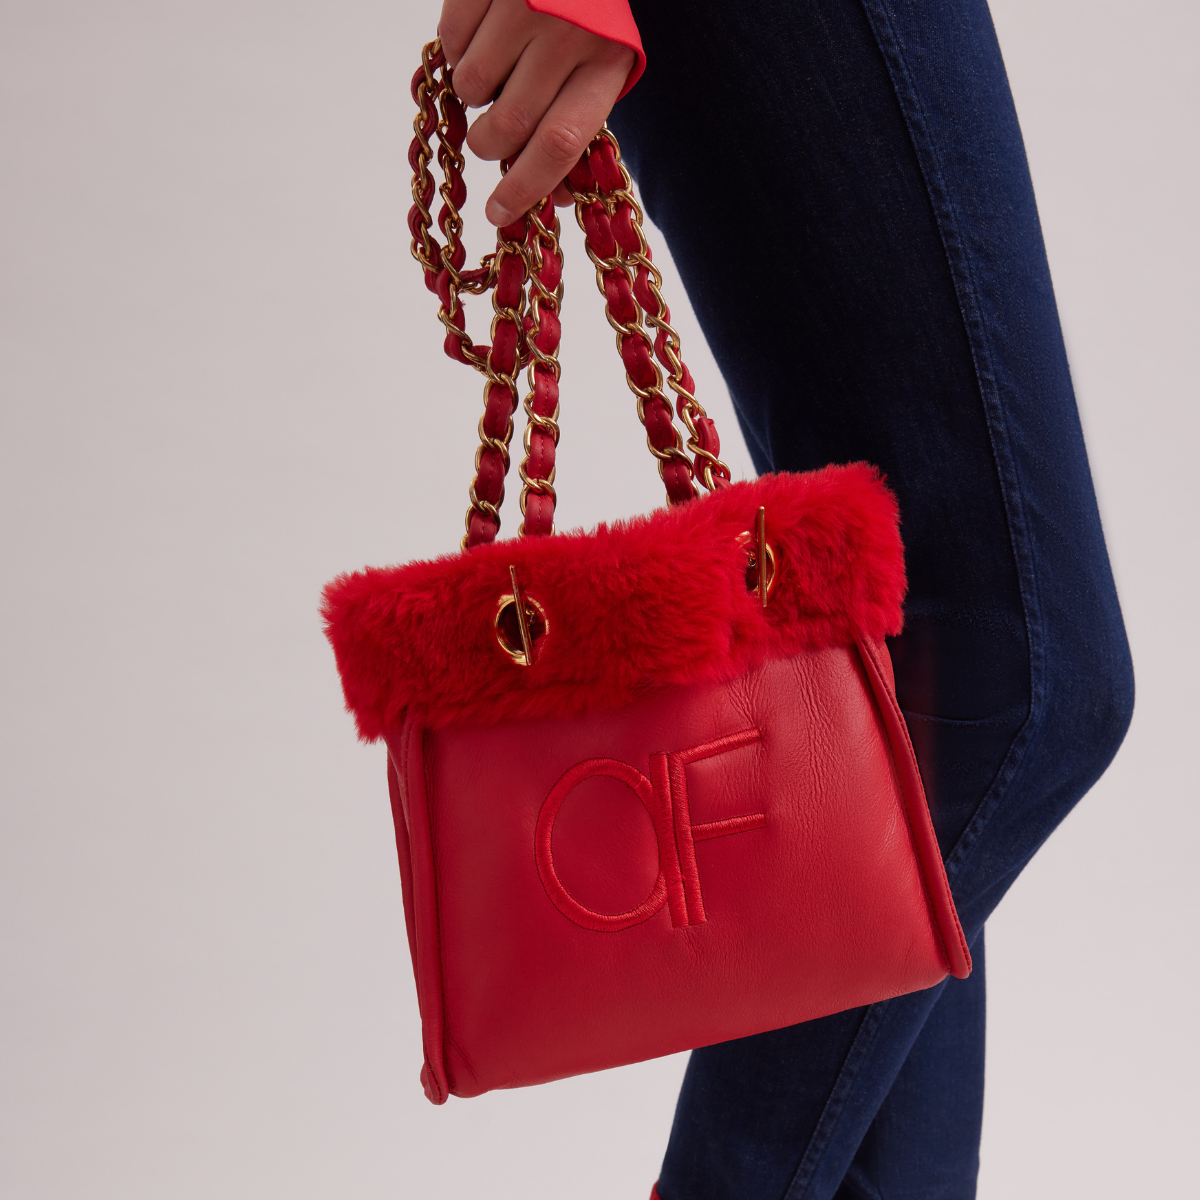 Discover the FELIX red leather shoulder bag from ANNE FONTAINE